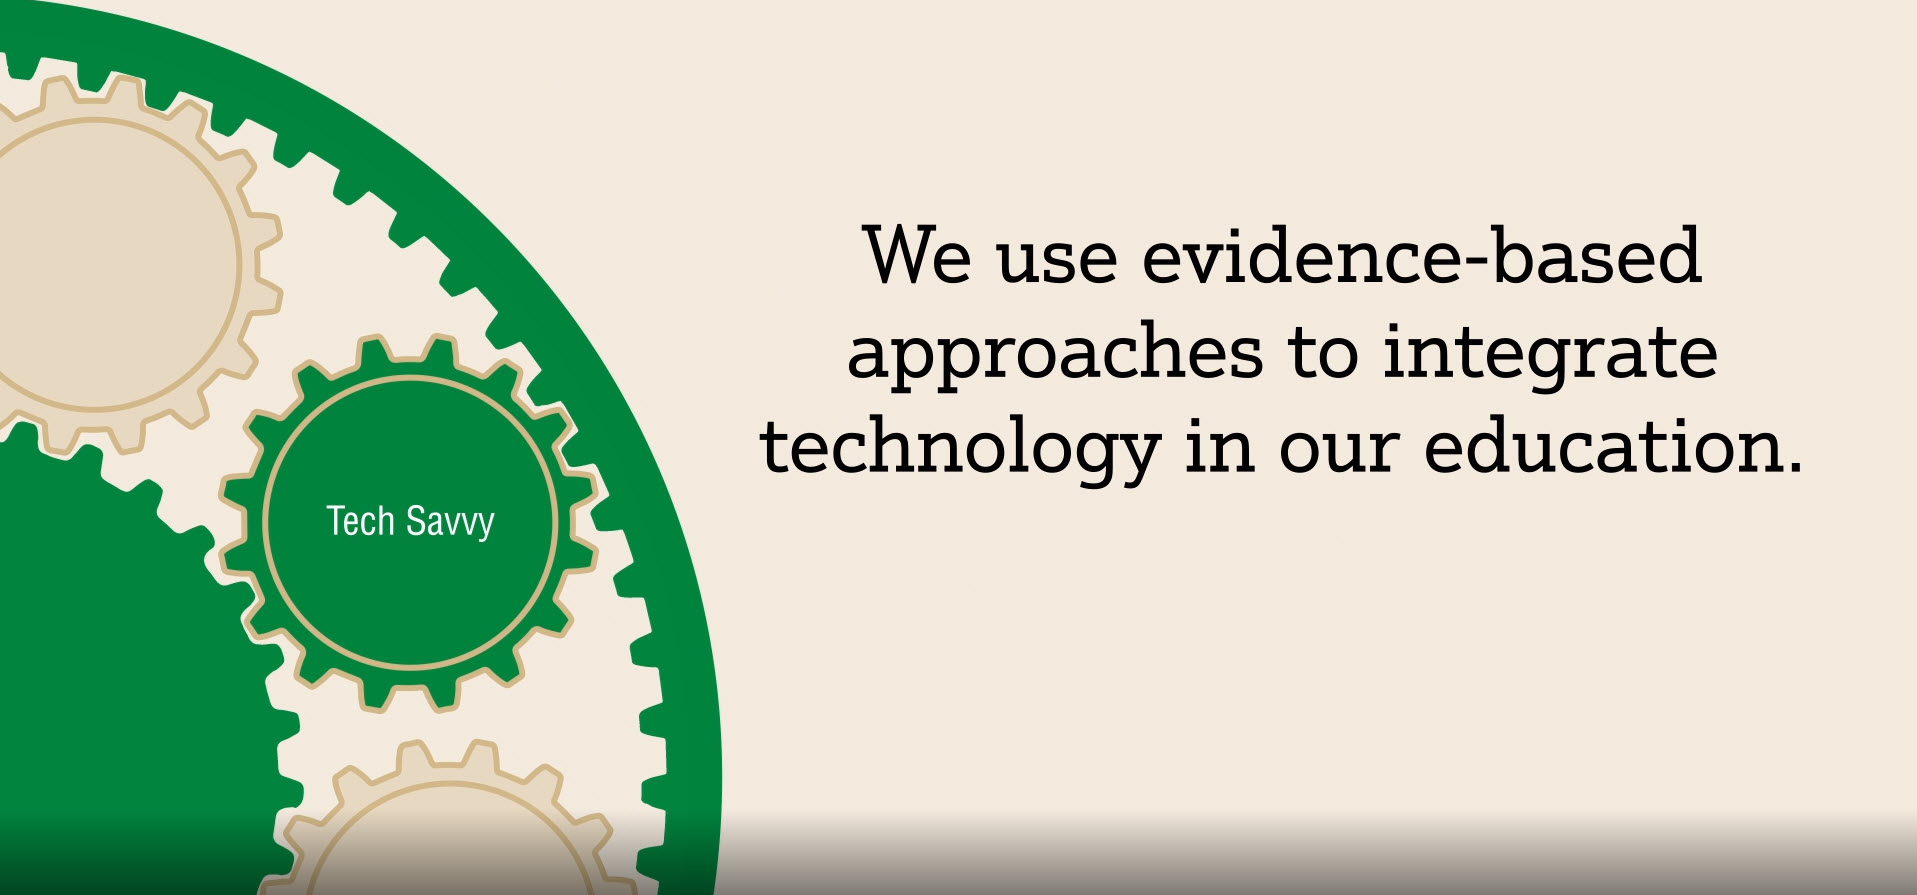 We use evidence-based approaches to integrate technology in our education.